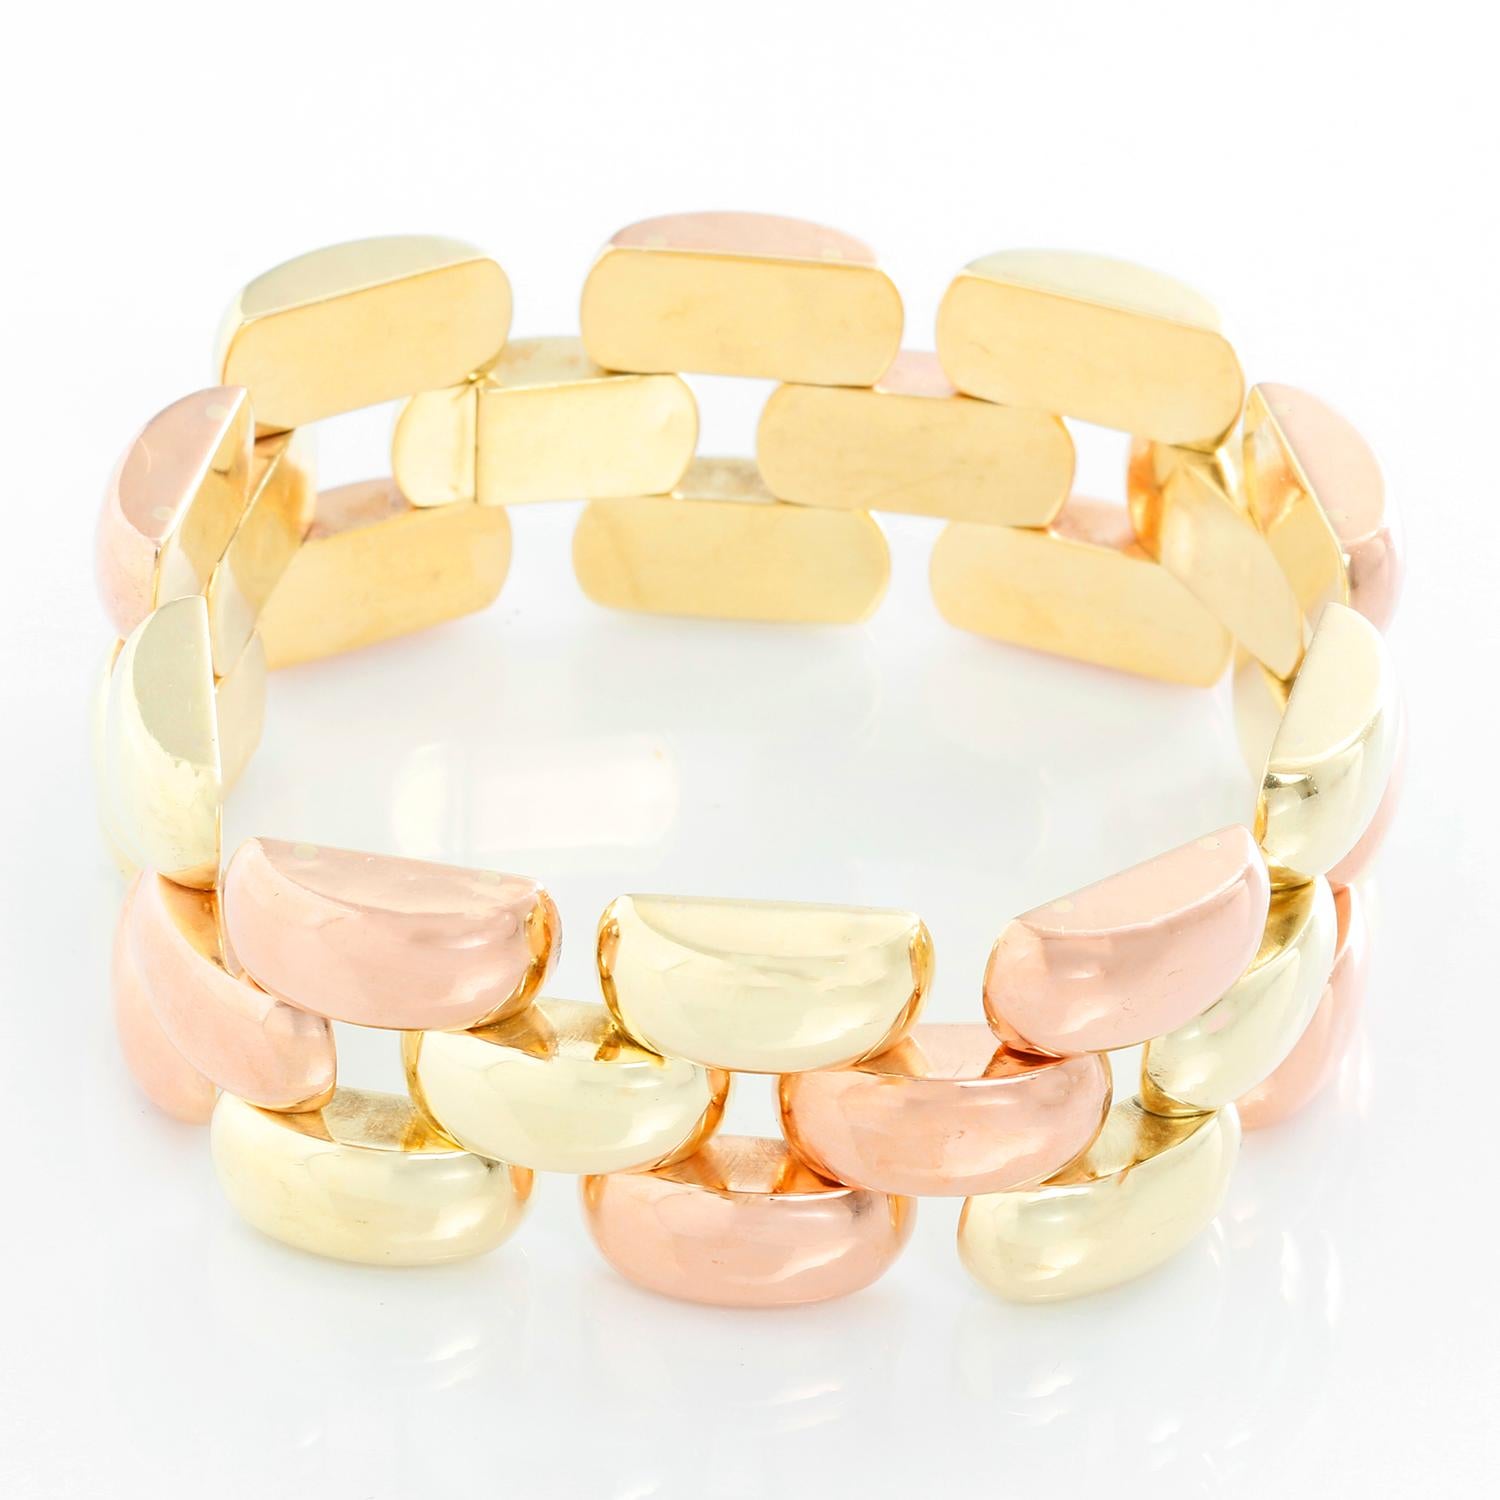 This beautiful bi-color bracelet features 14k yellow and rose gold. It is apx. 7-inches in length and 7/8-inch in width with a total weight of 39.7 grams.